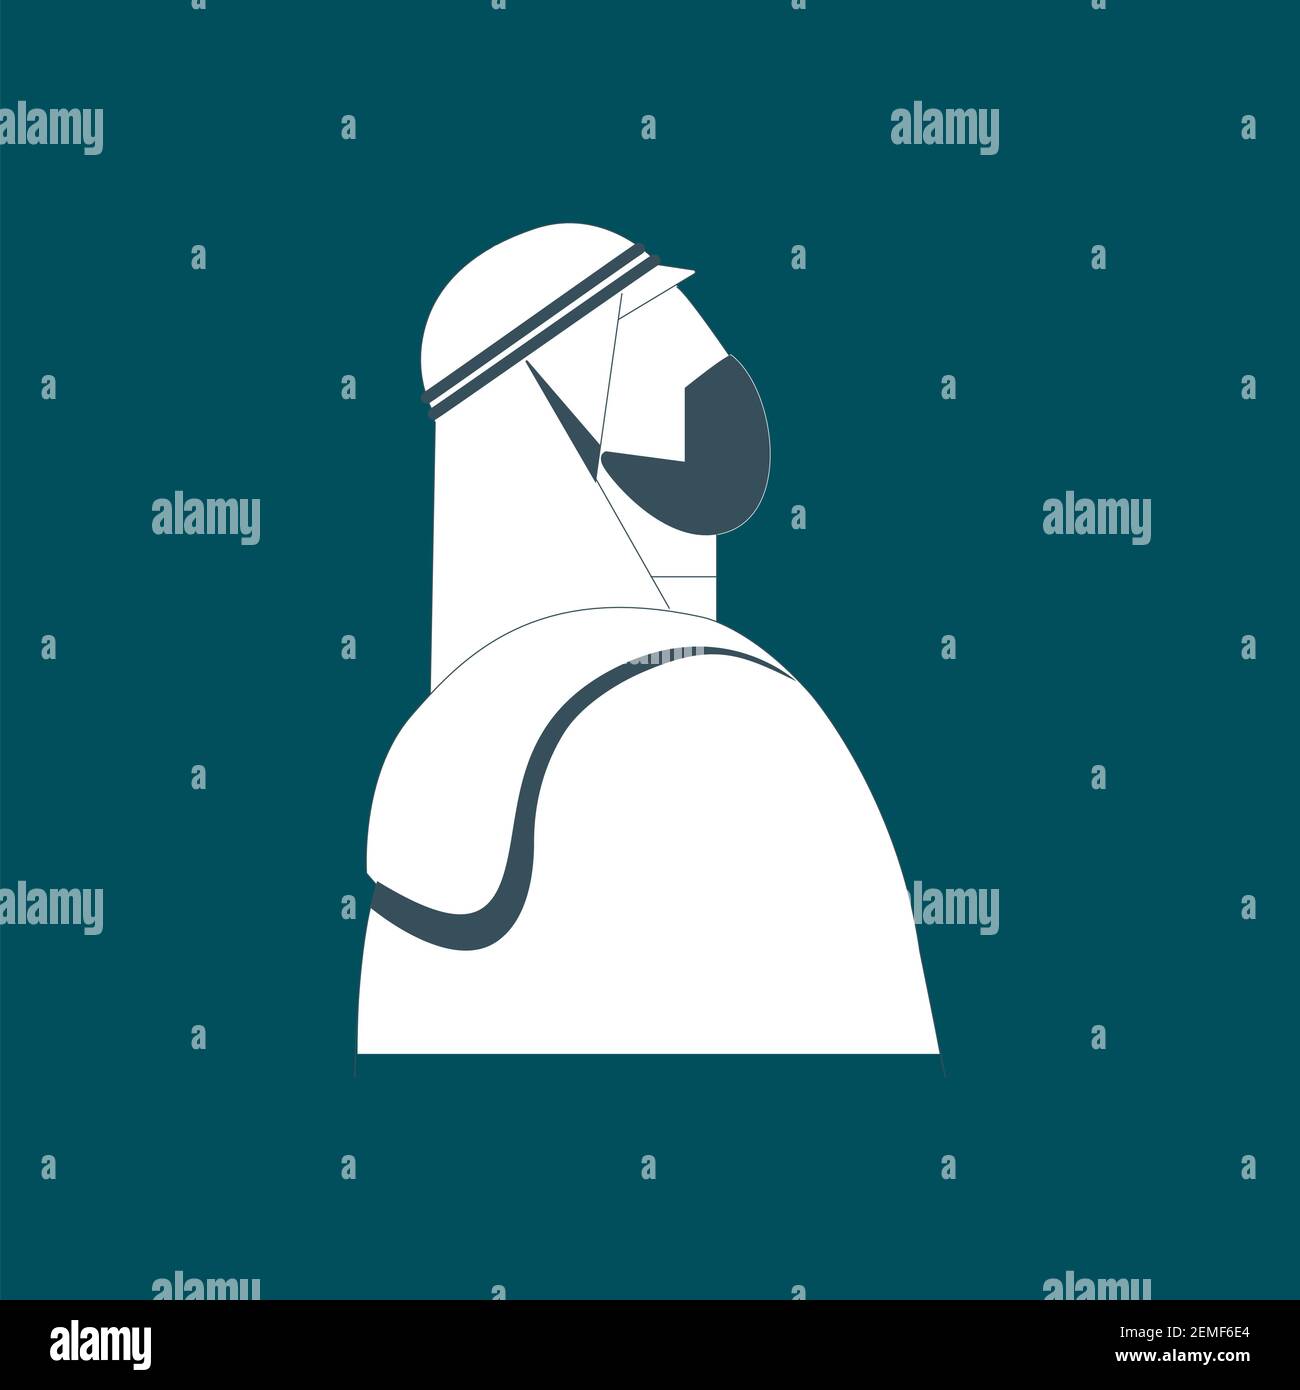 Arab man with mask looking up flat design, A Saudi man icon wearing shemagh and a thobe Stock Vector